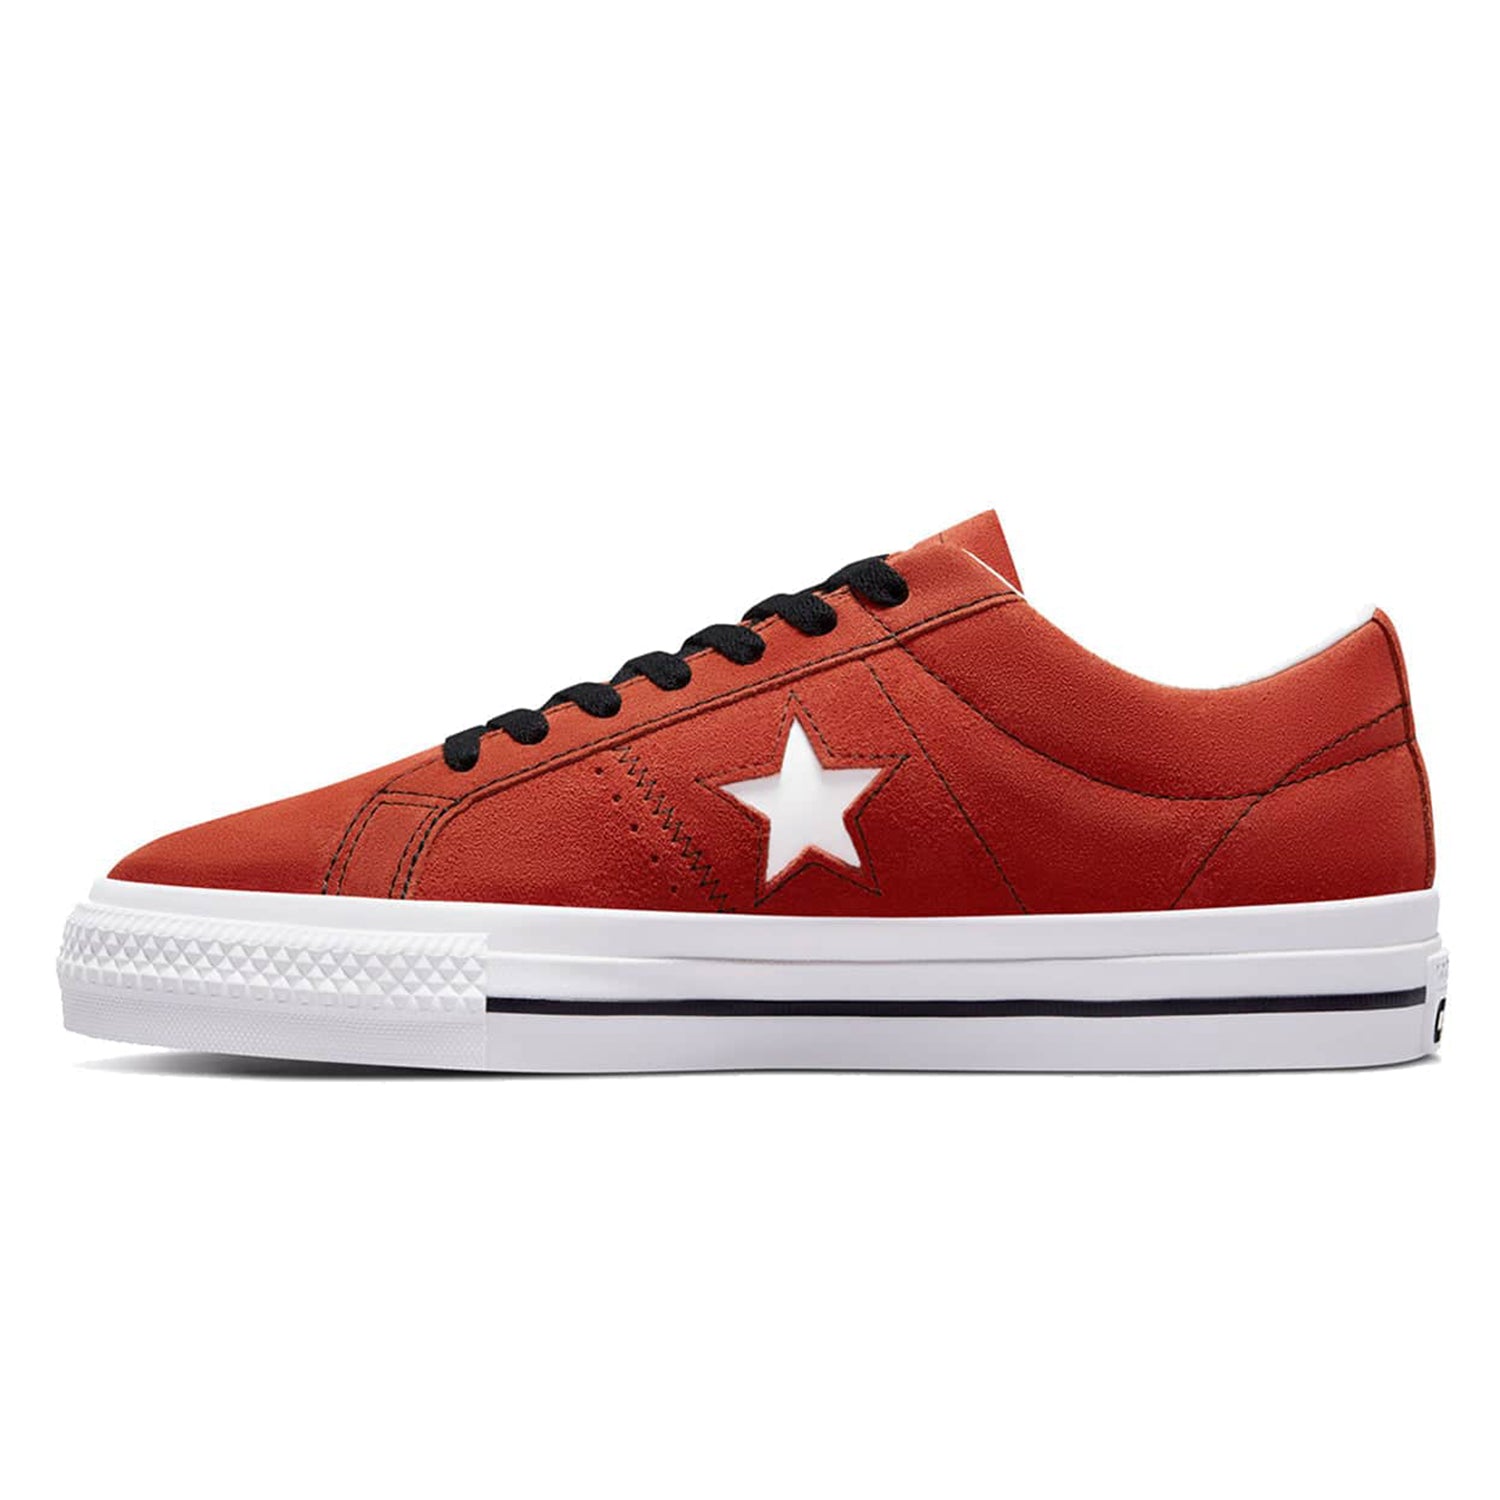 Converse CONS One Star Pro OX Fire - Orchard Skateshop